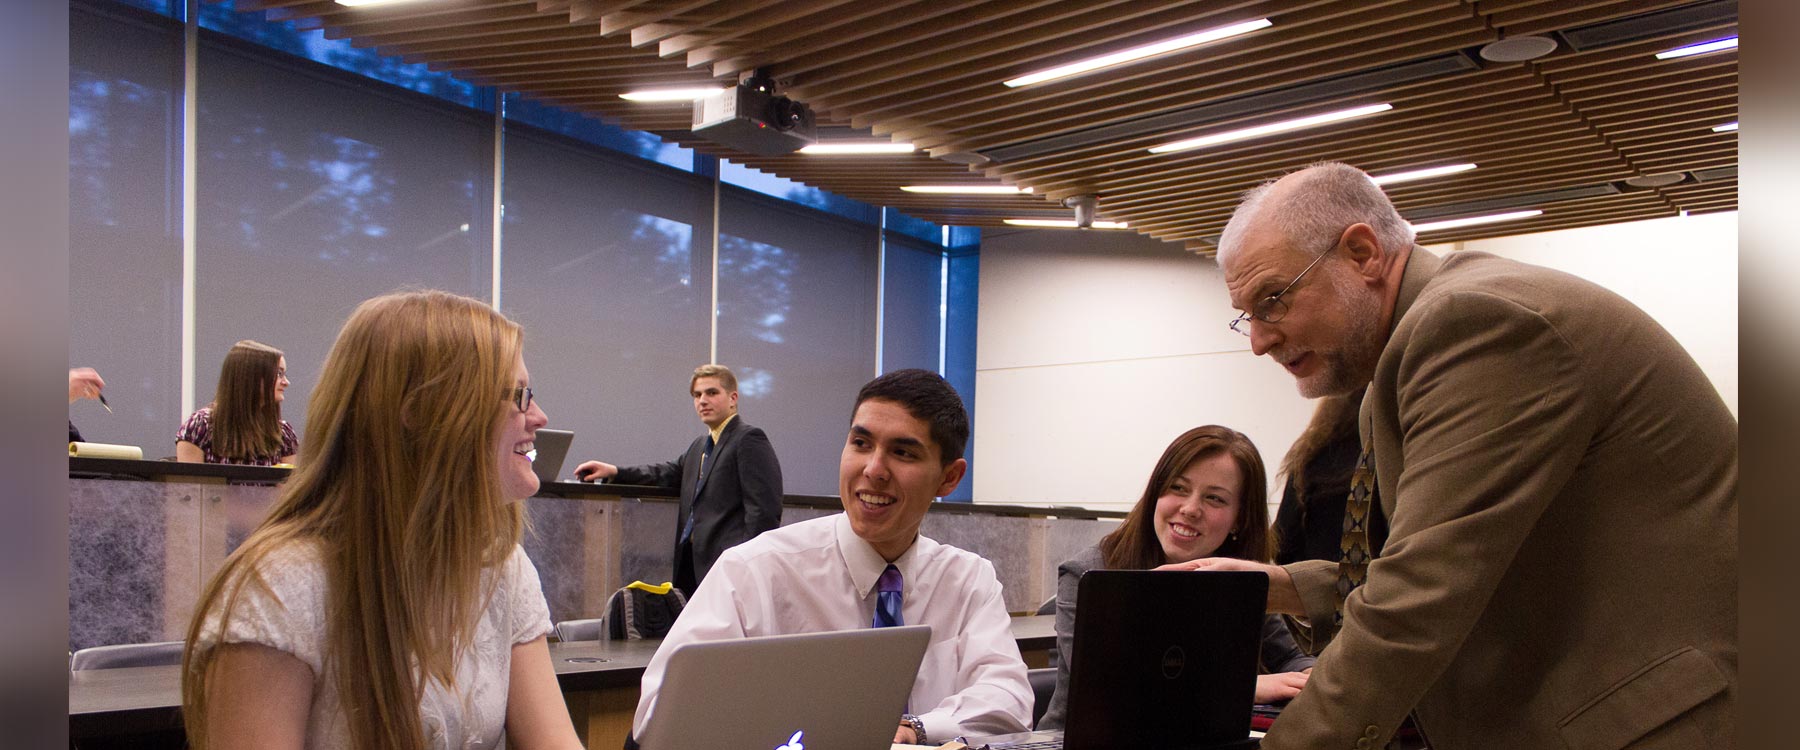 A professor leans over a table and speaks with three students.